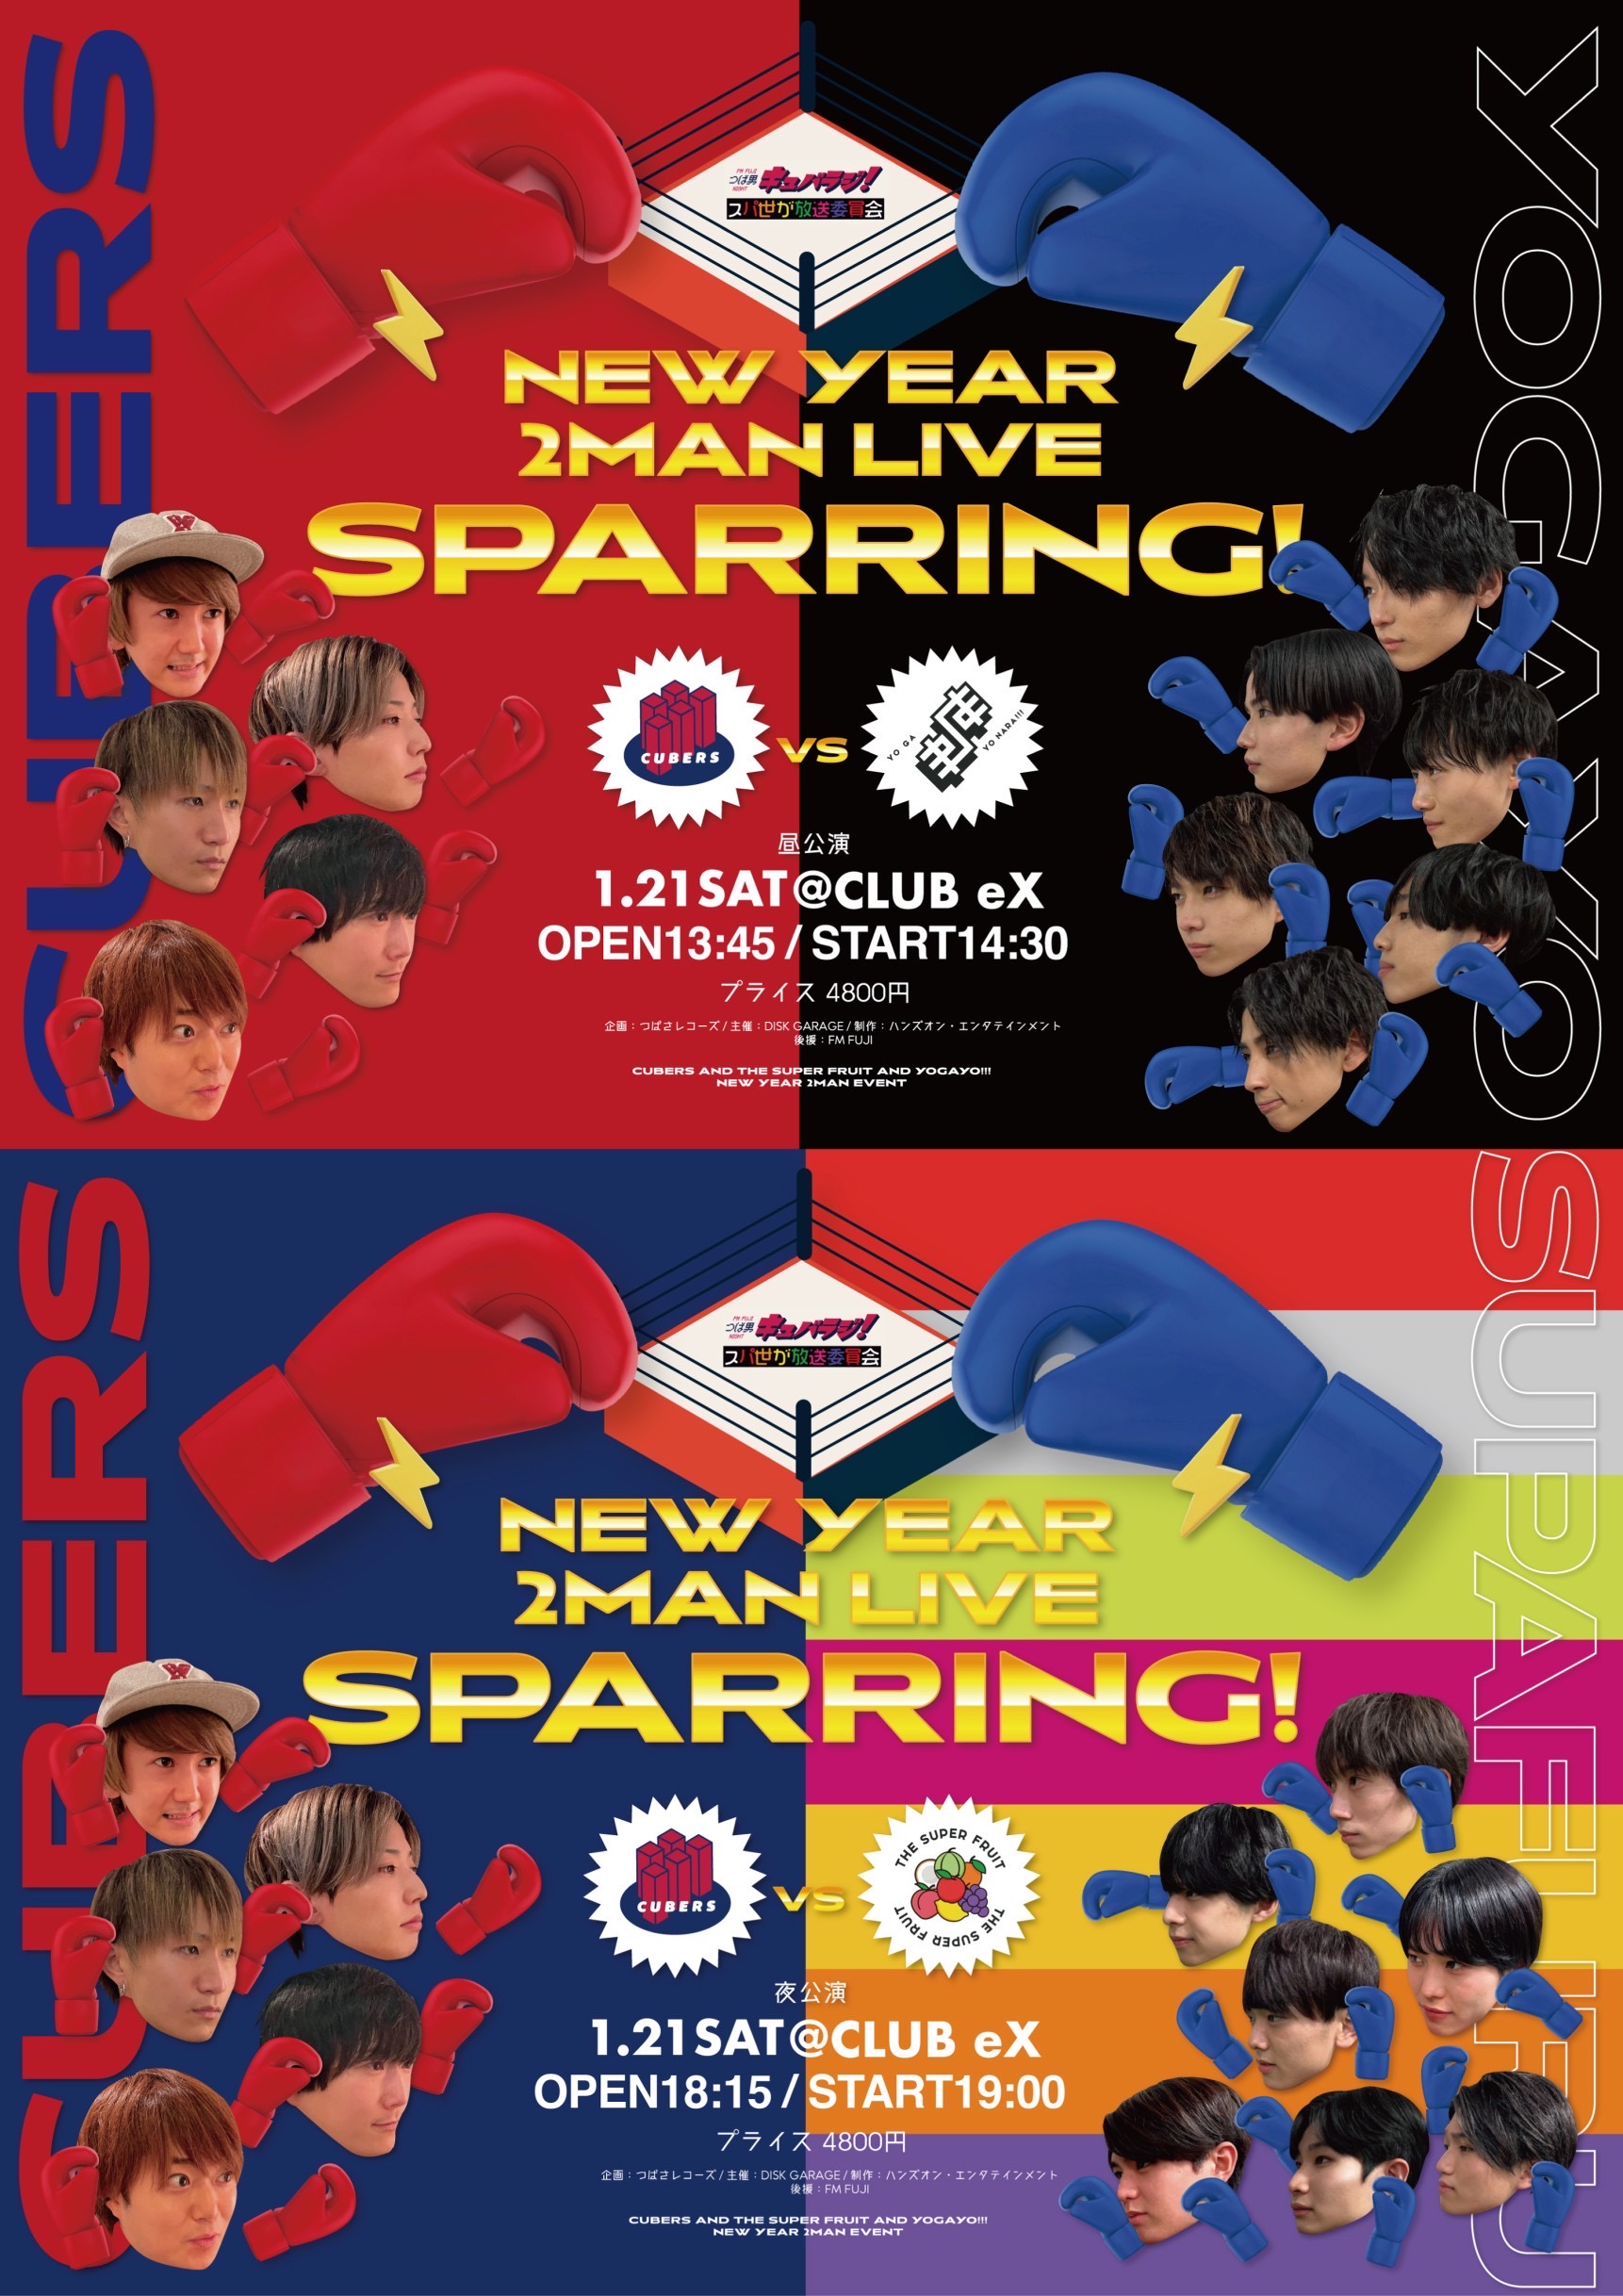 【NEWS】2023年1月21日(土)に”FM FUJI つば男NIGHT presents”「New Year 2Man Live Sparring」開催決定！